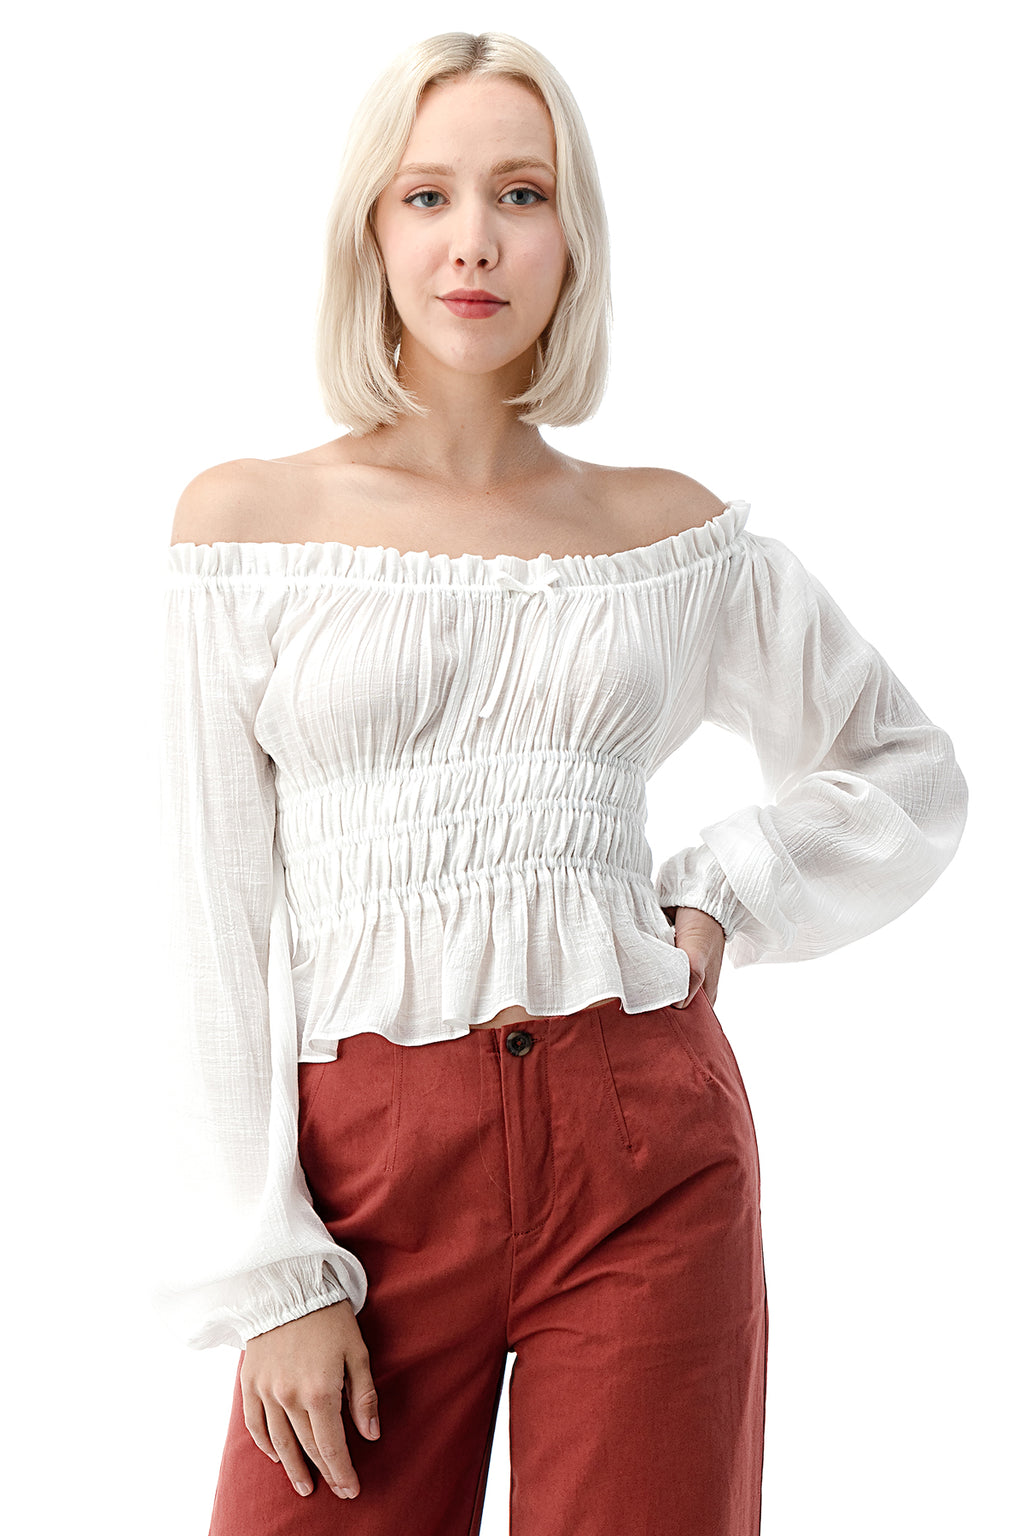 EDGY Land Girl's and Women's Ruffled Off Shoulder Bell Sleeve Shirred Fashion Blouse